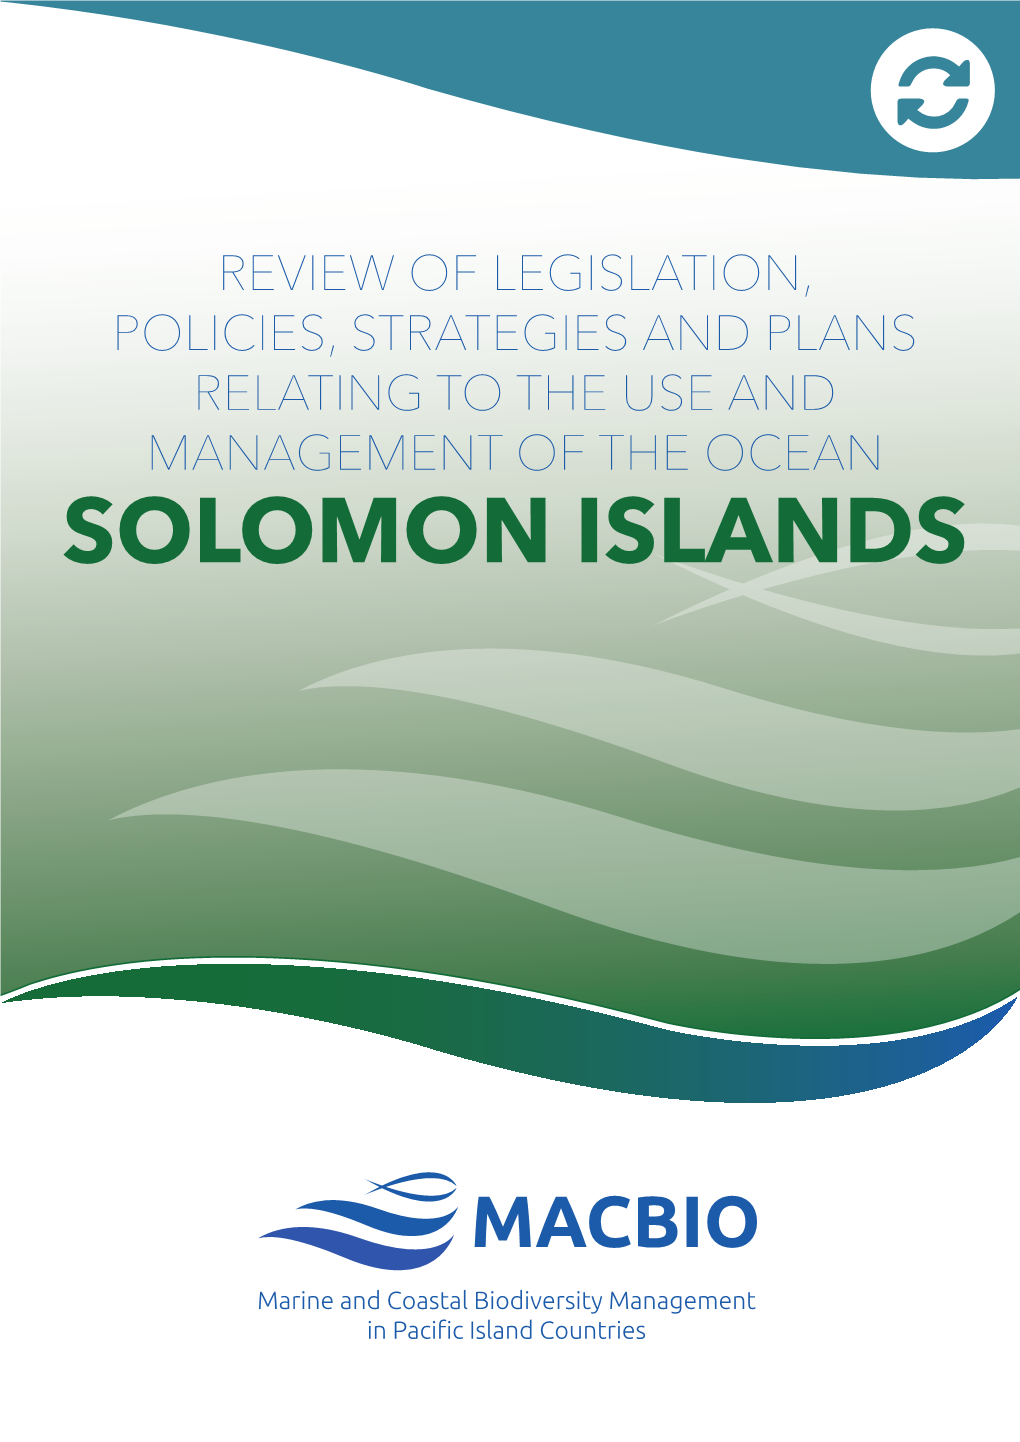 SOLOMON ISLANDS EFFECTIVE MANAGEMENT Marine and Coastal Ecosystems of the Pacific Ocean Provide Benefits for All People in and Beyond the Region